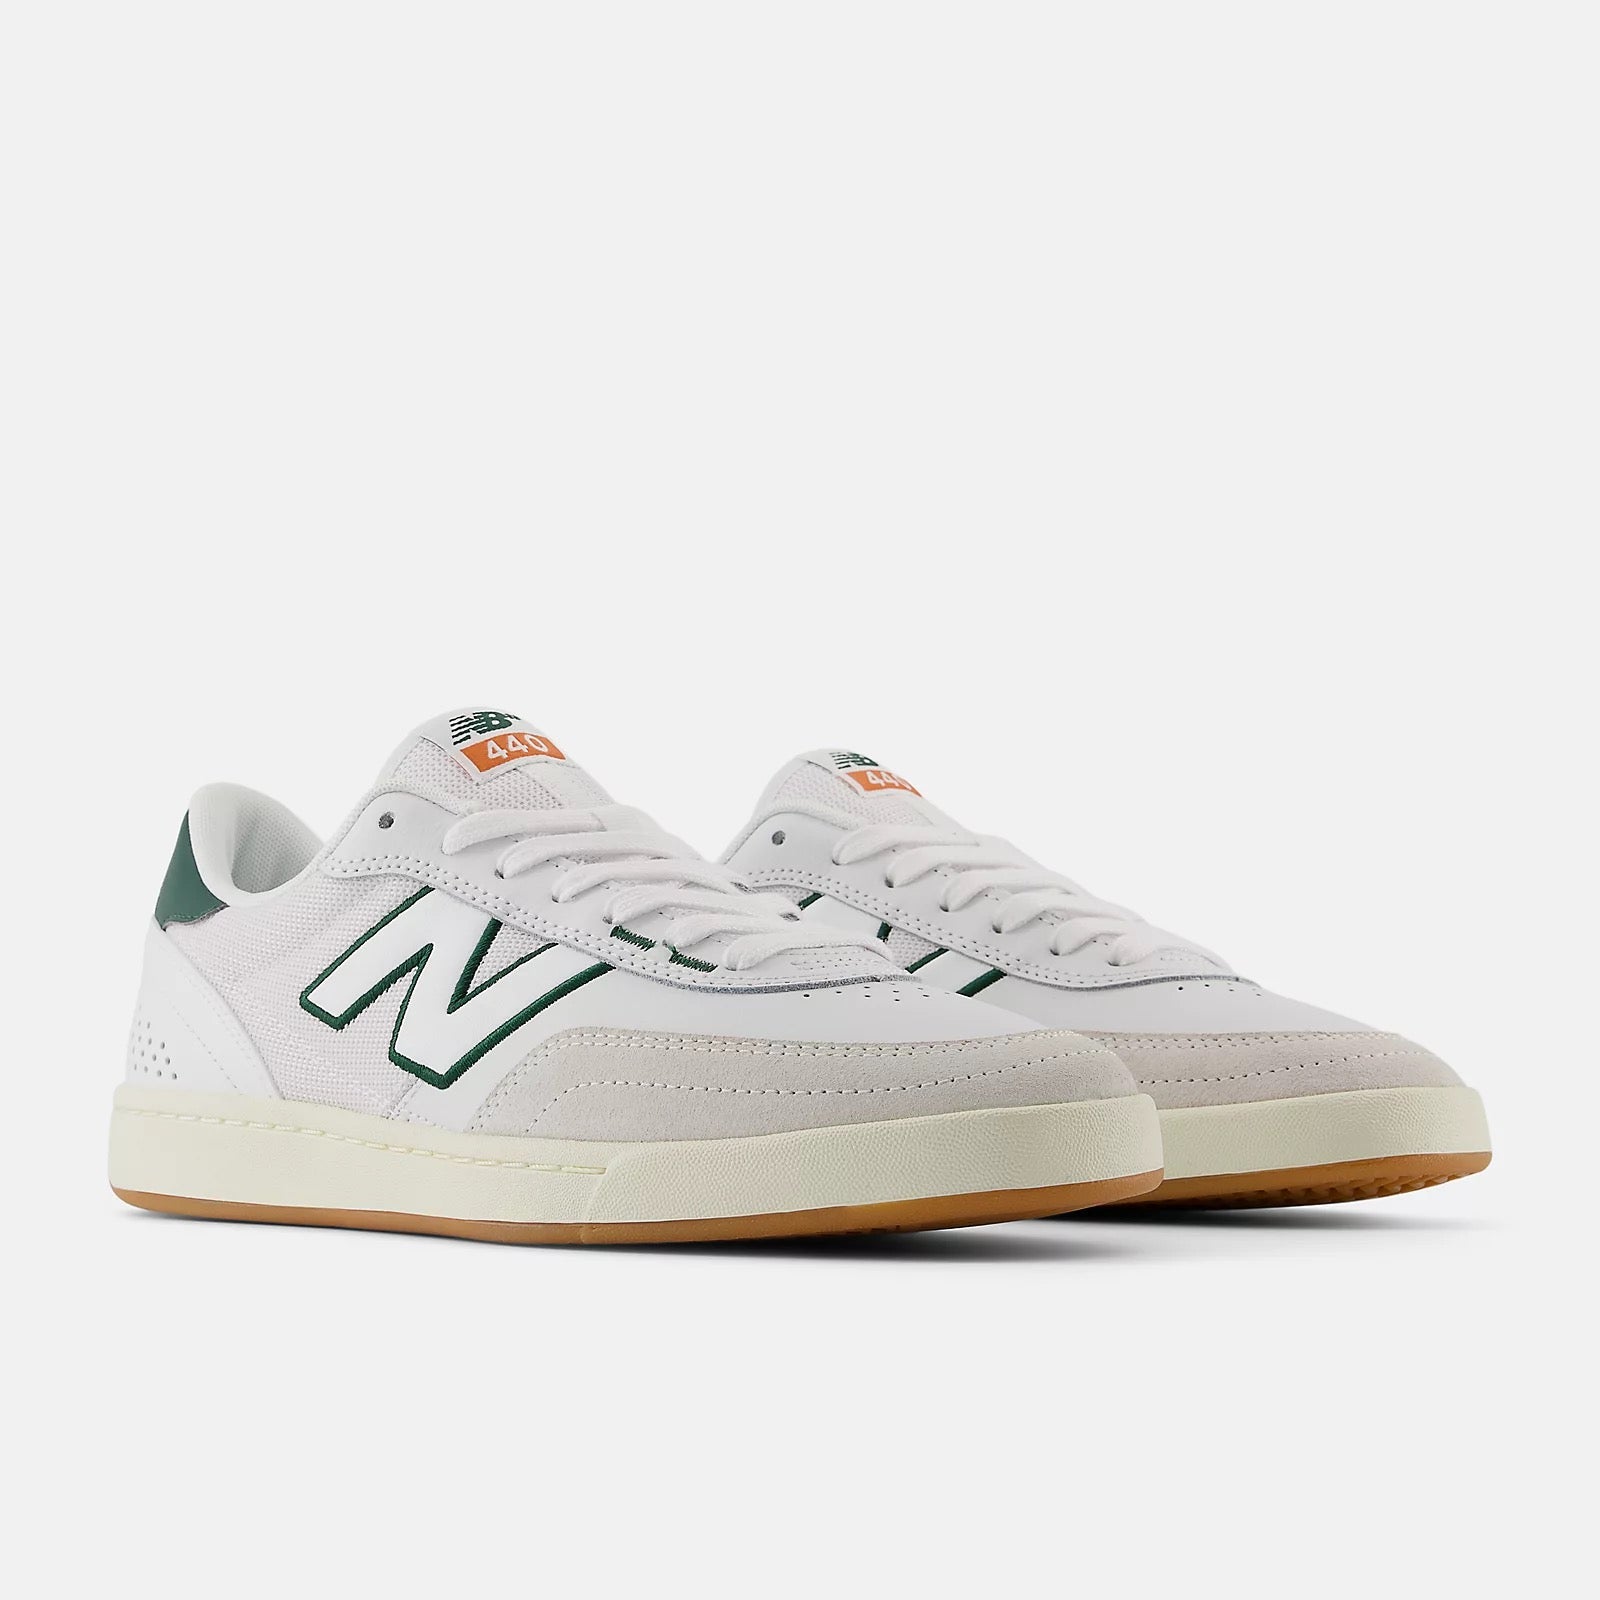 New Balance Numeric 440 V2 White with Forest Green